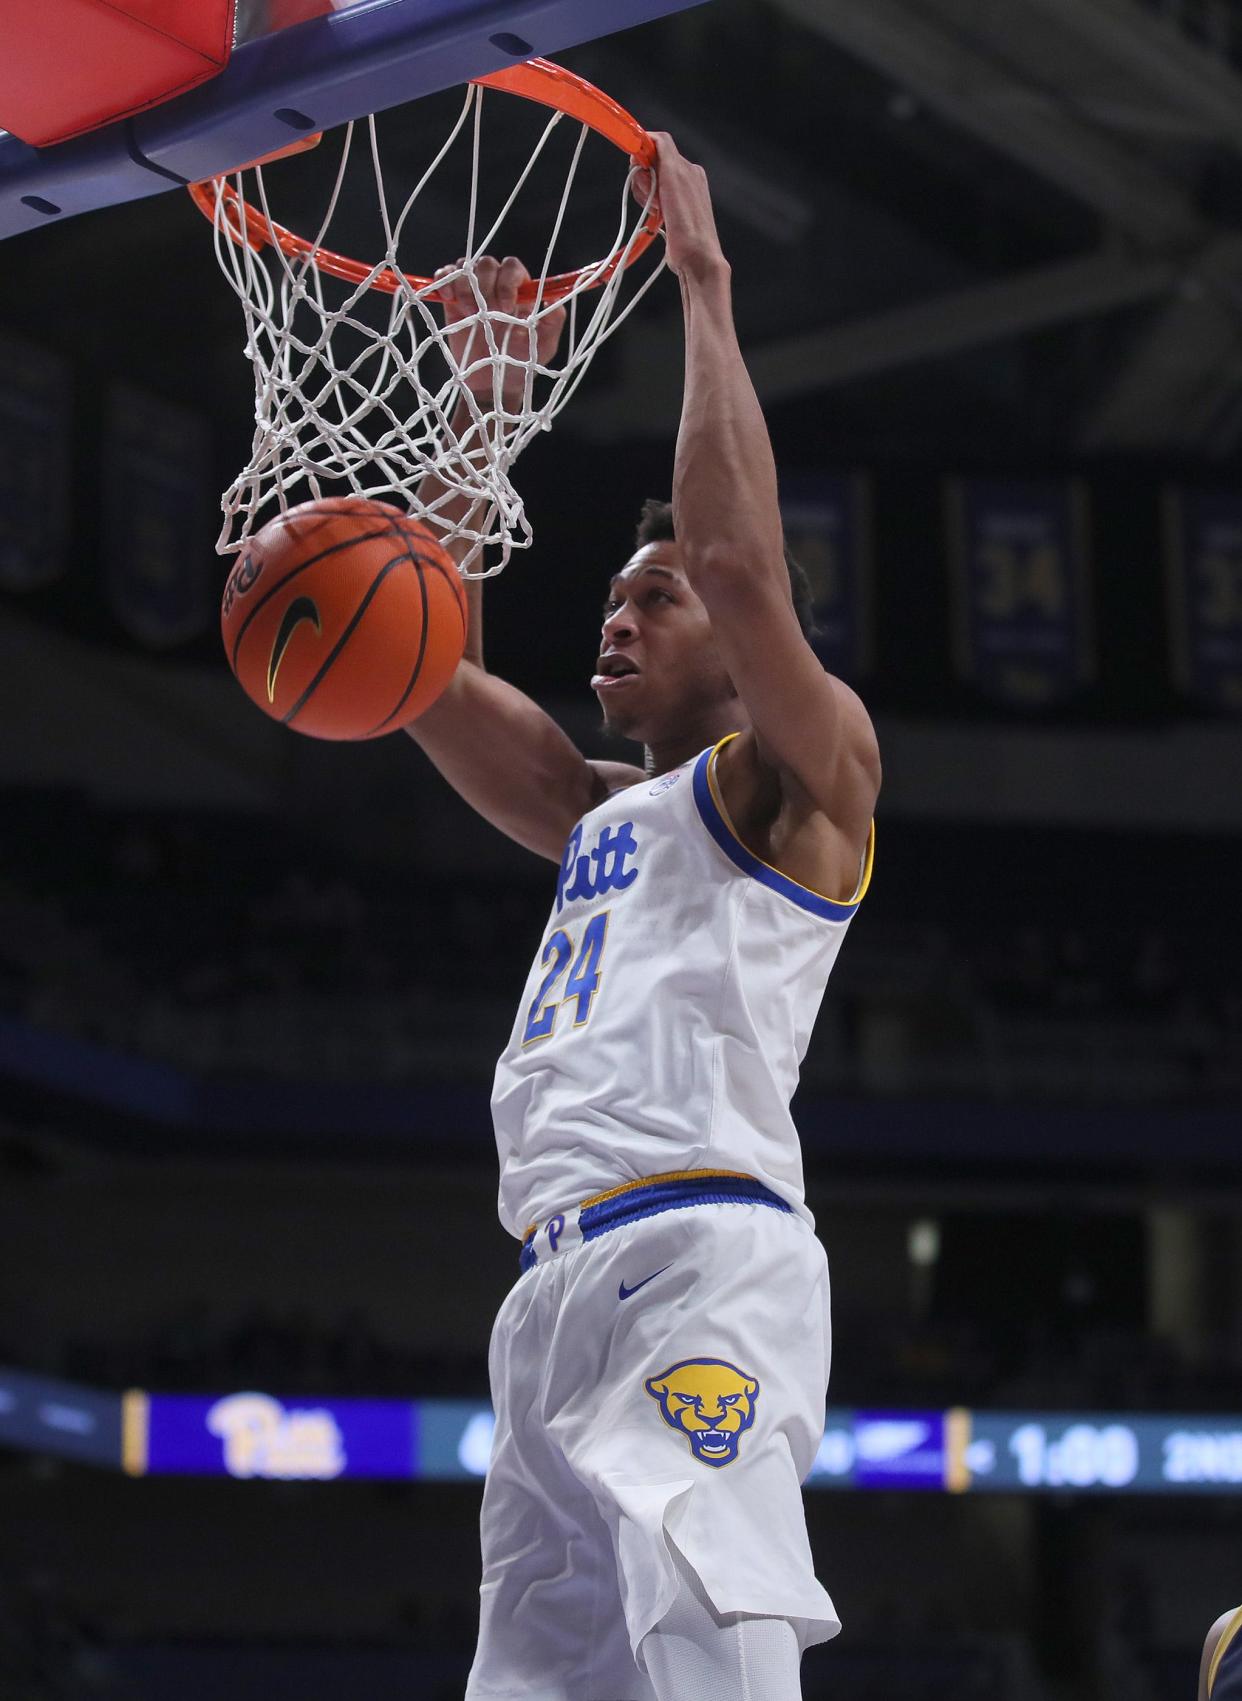 Pitt's William Jeffress dunks the ball during the second half against the Notre Dame on Feb. 3 at the Petersen Events Center in Pittsburgh. Jeffress, a McDowell graduate, has transferred to Louisiana Tech.